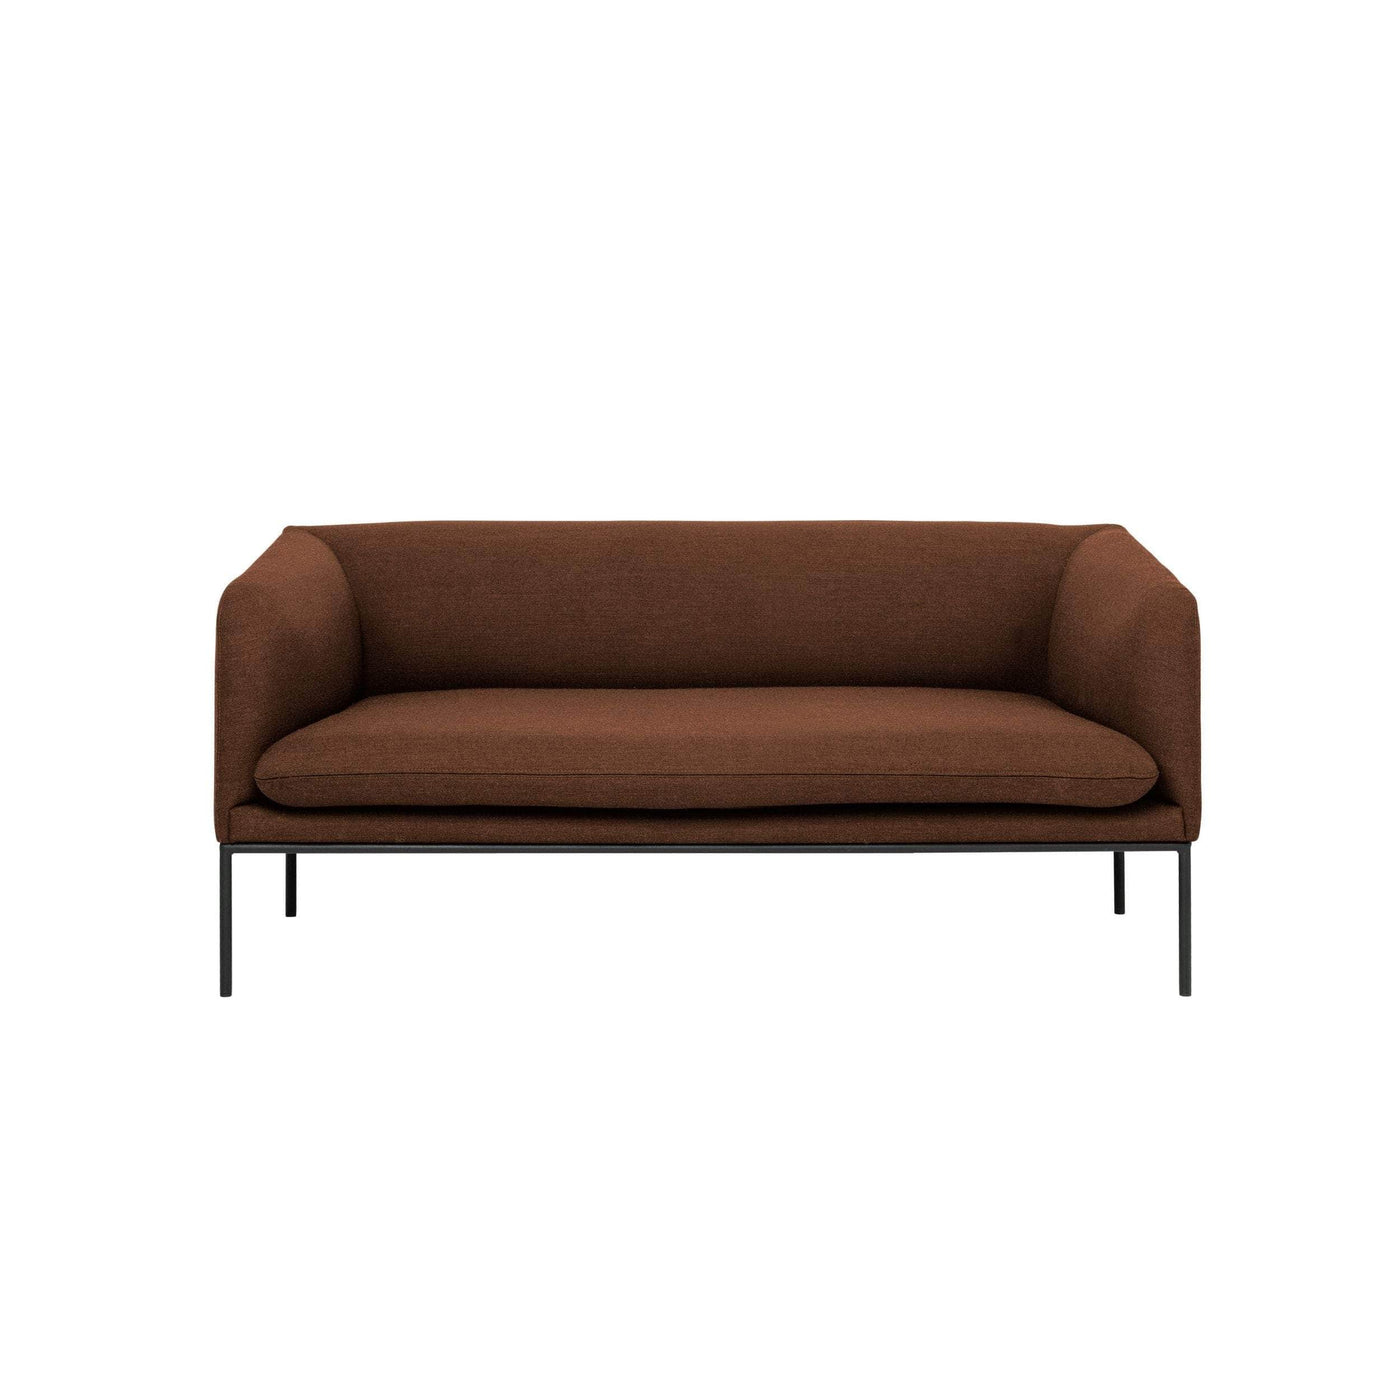 Ferm Living Turn sofa 2 seater, rust fiord by Kvadrat fabric. Made to order from someday designs. #colour_rust-fiord-by-kvadrat